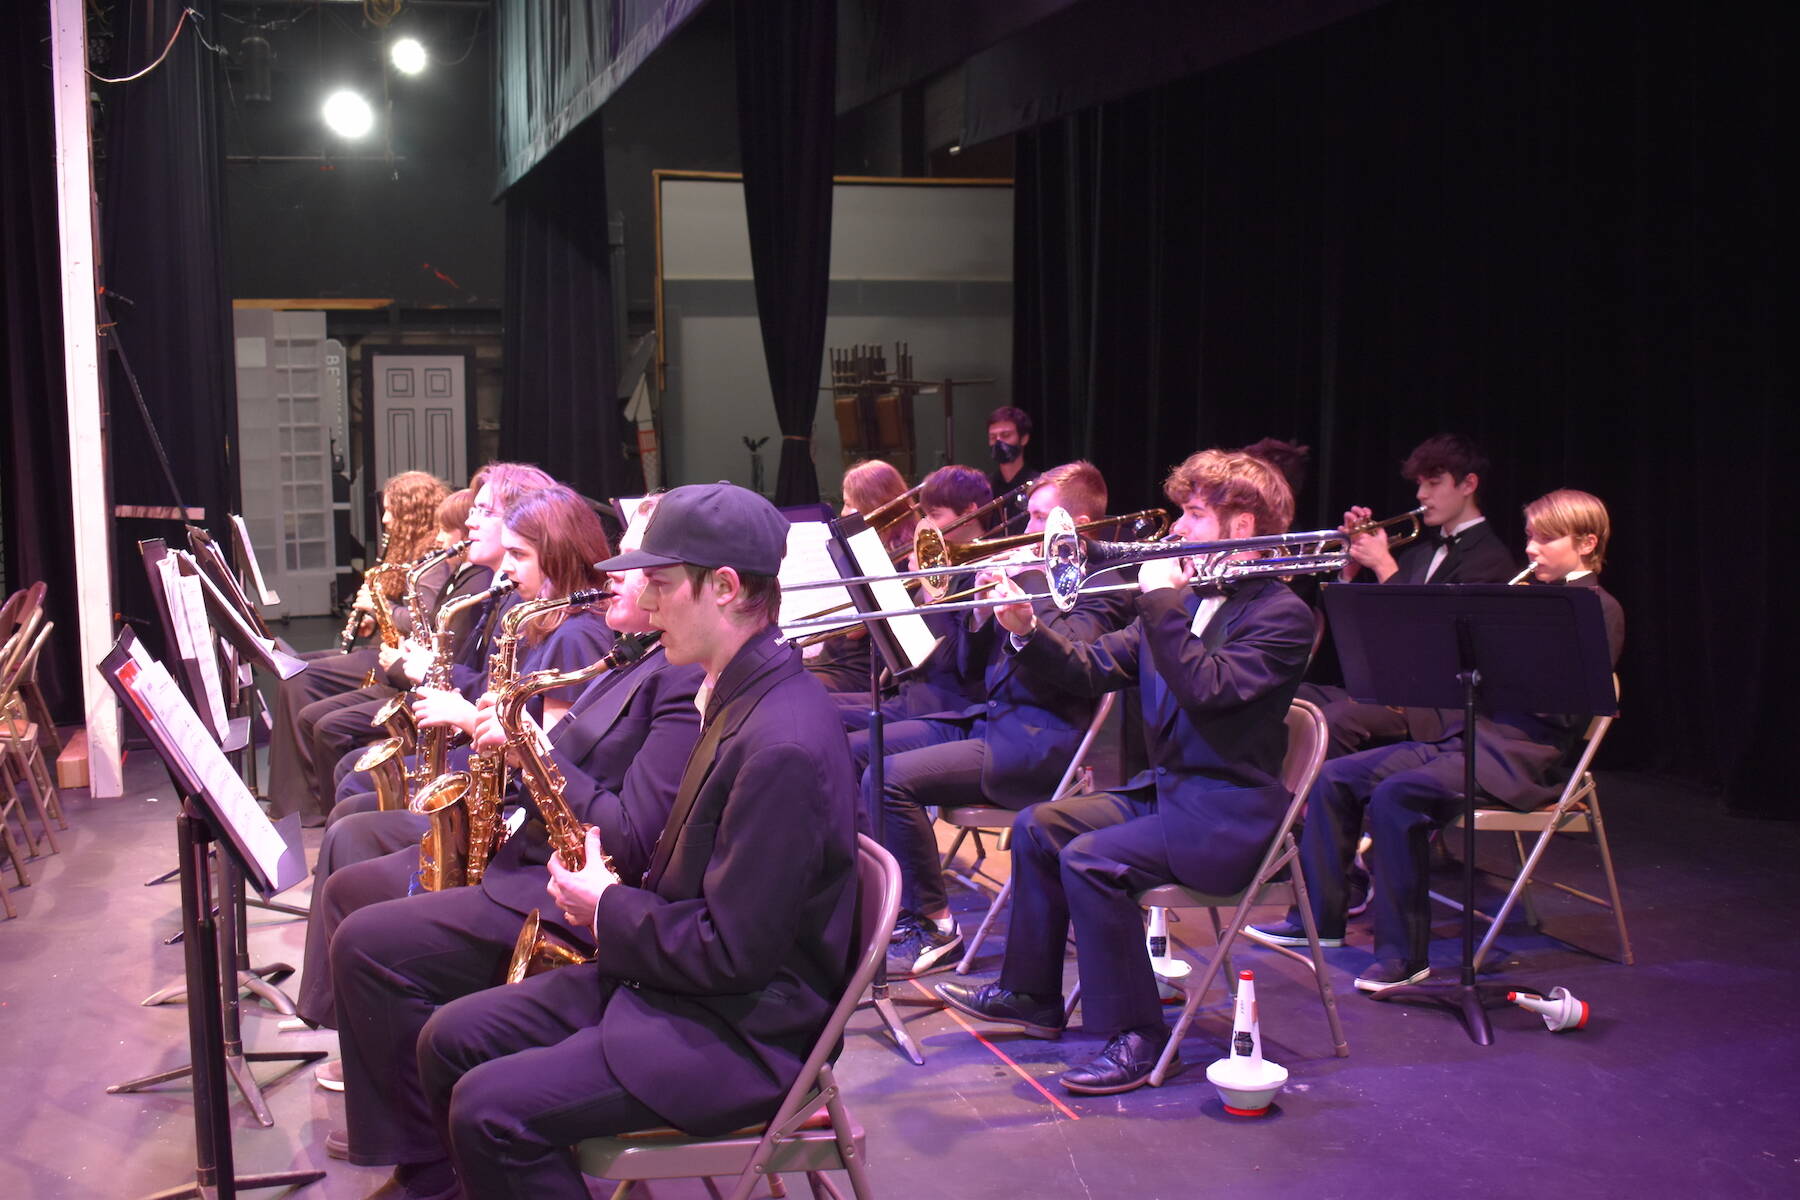 Kelley Balcomb-Bartok \ Staff photo
The Friday Harbor High School Jazz Band performs prior to the start of the San Juan Public Schools Foundation’s 28th annual Knowledge Bowl.